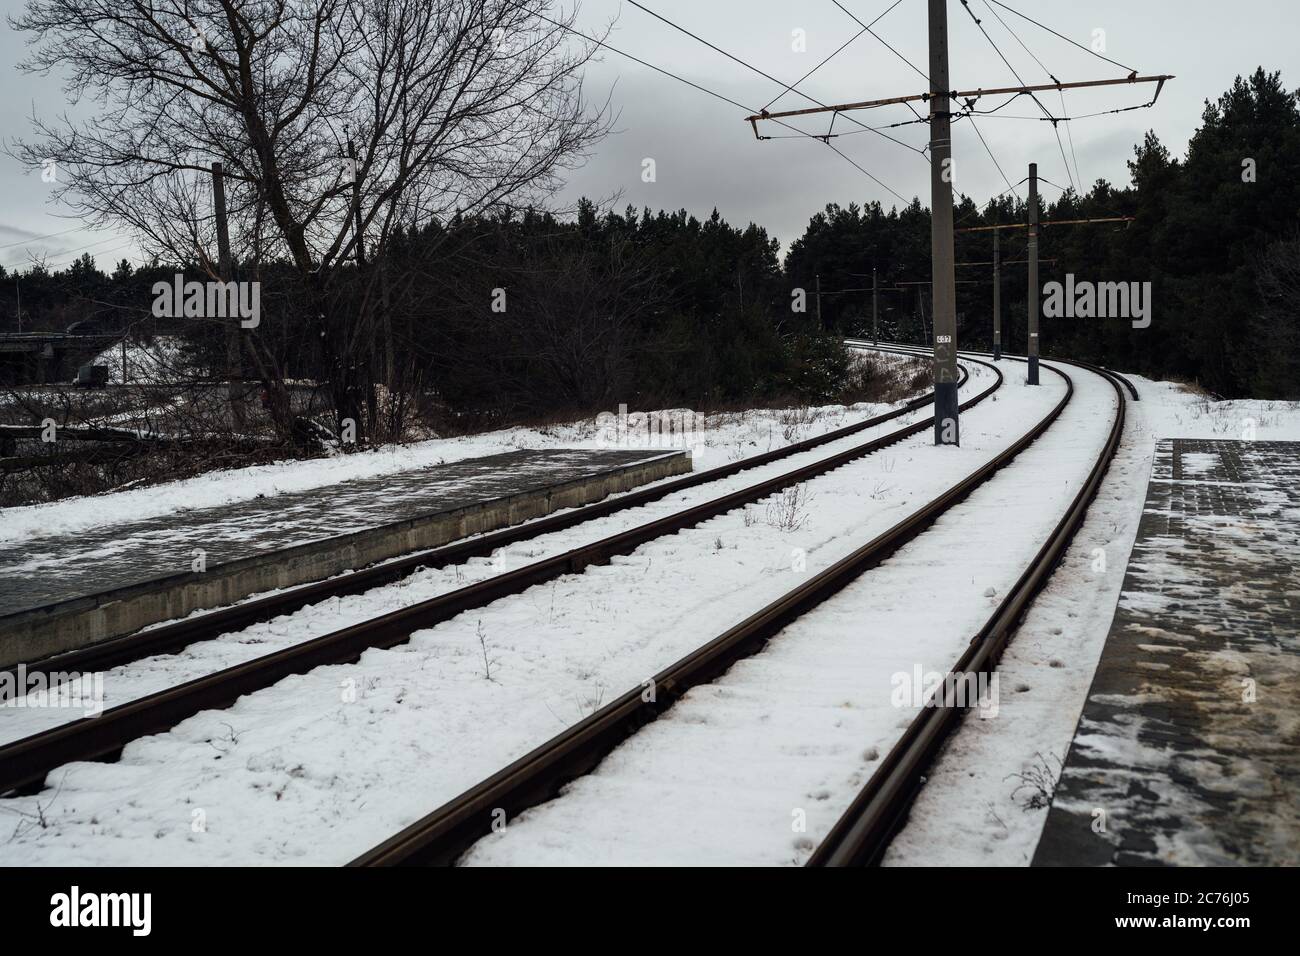 Train rails in winter season. Beautiful landscape of countryside. Rail track laid through forest. Stock Photo